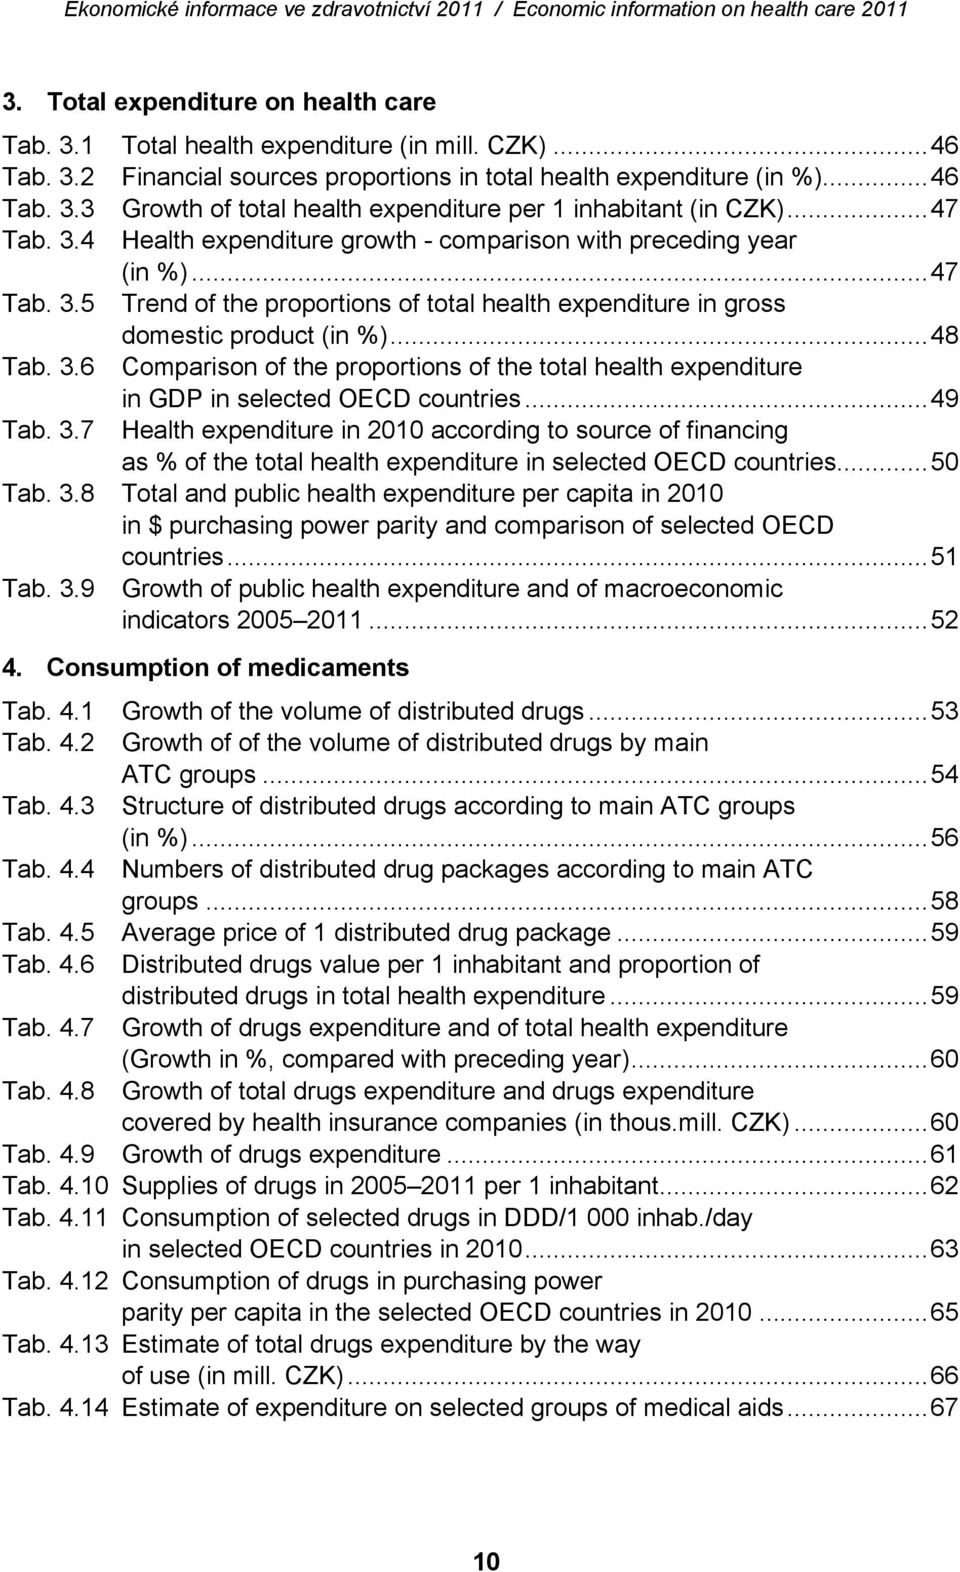 ..49 Tab. 3.7 Health expenditure in 2010 according to source of financing as % of the total health expenditure in selected OECD countries...50 Tab. 3.8 Total and public health expenditure per capita in 2010 in $ purchasing power parity and comparison of selected OECD countries.